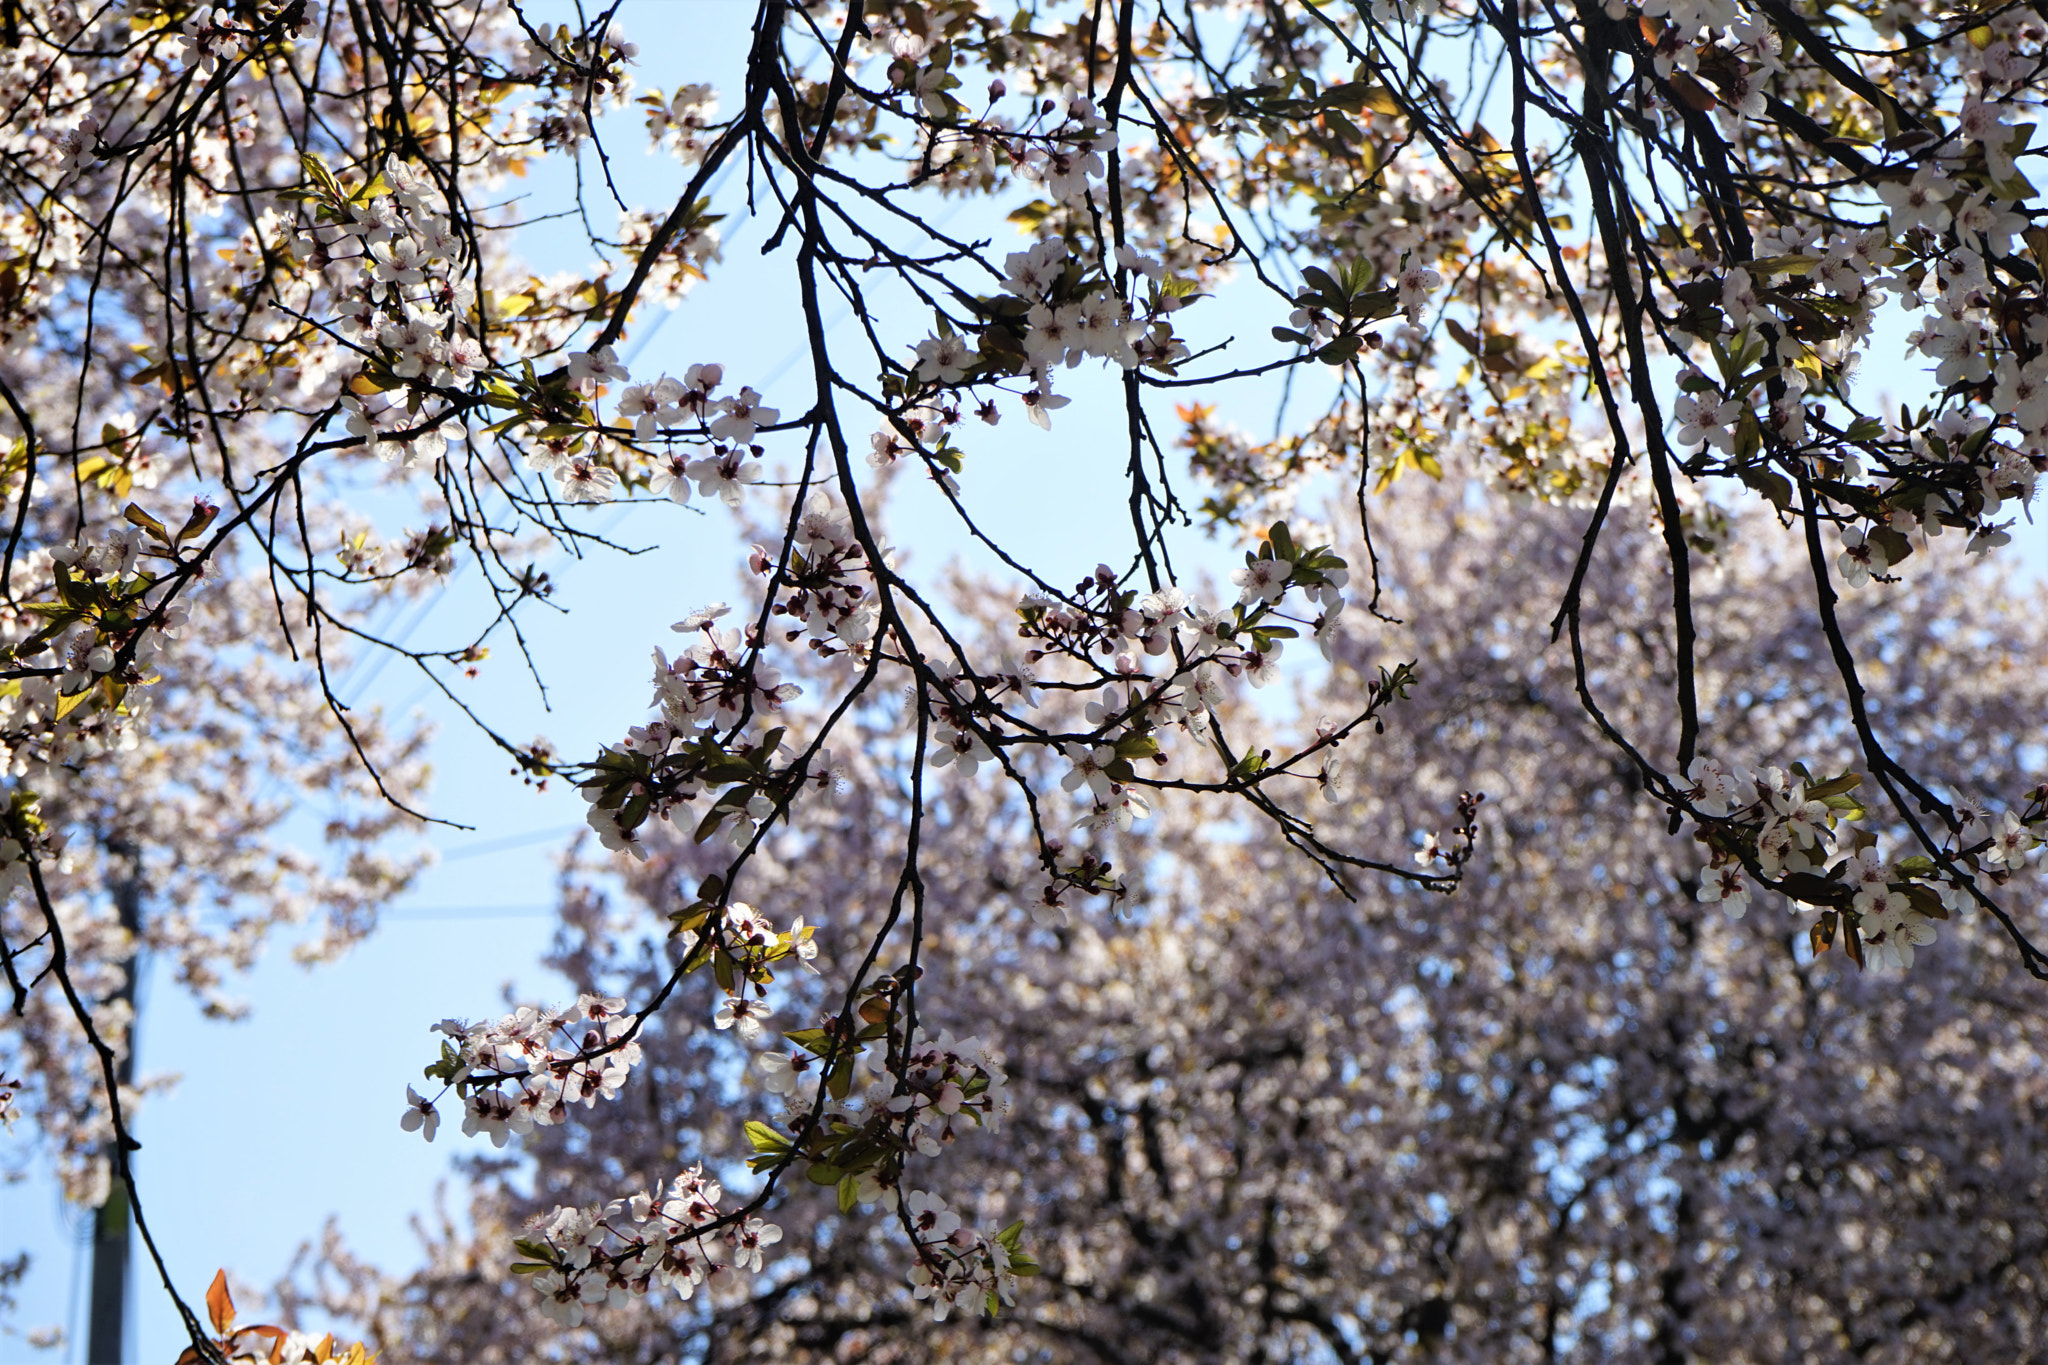 Sony a7 sample photo. Spring time - cherry tree photography